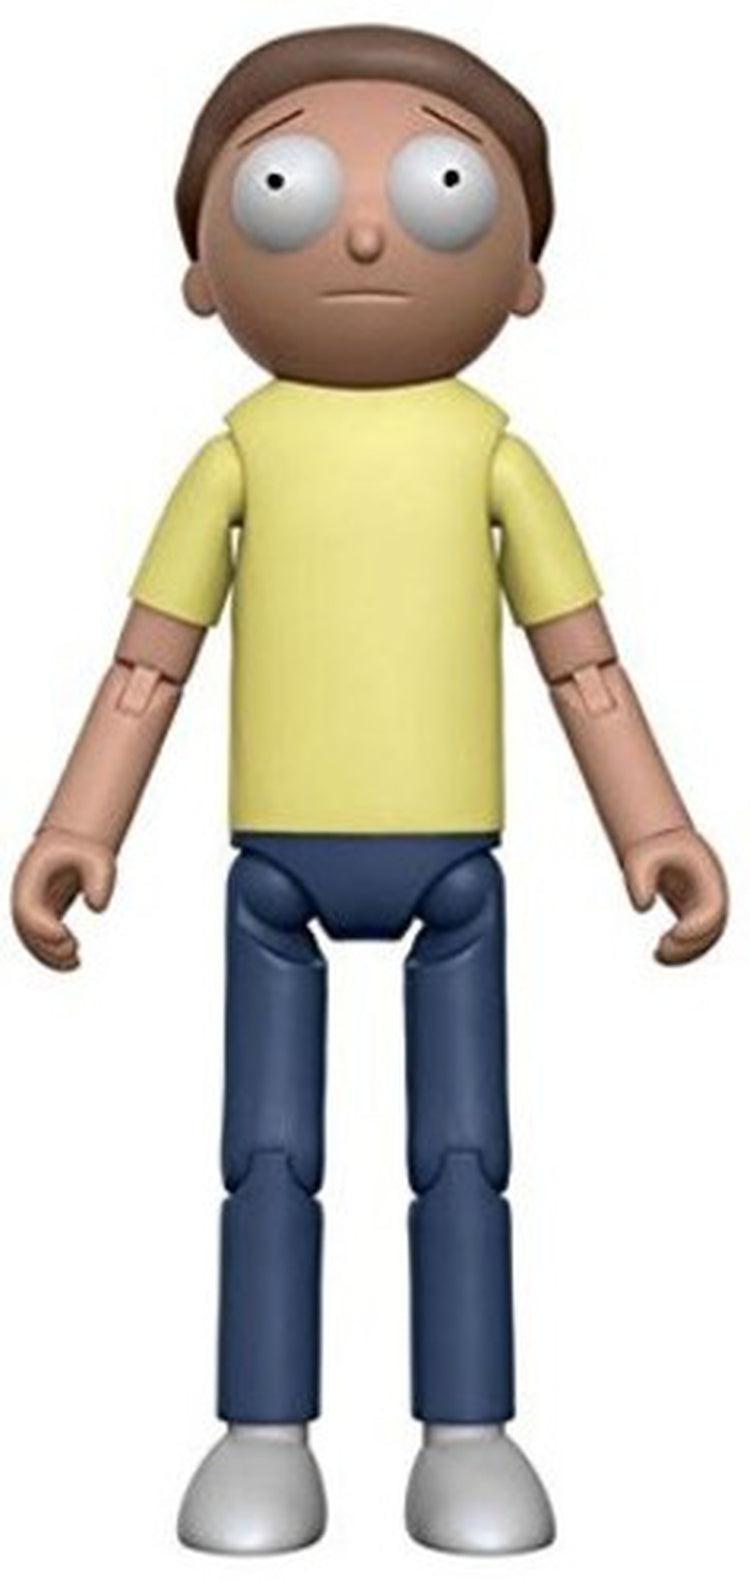 FUNKO ARTICULATED ACTION FIGURE: Rick & Morty - Morty